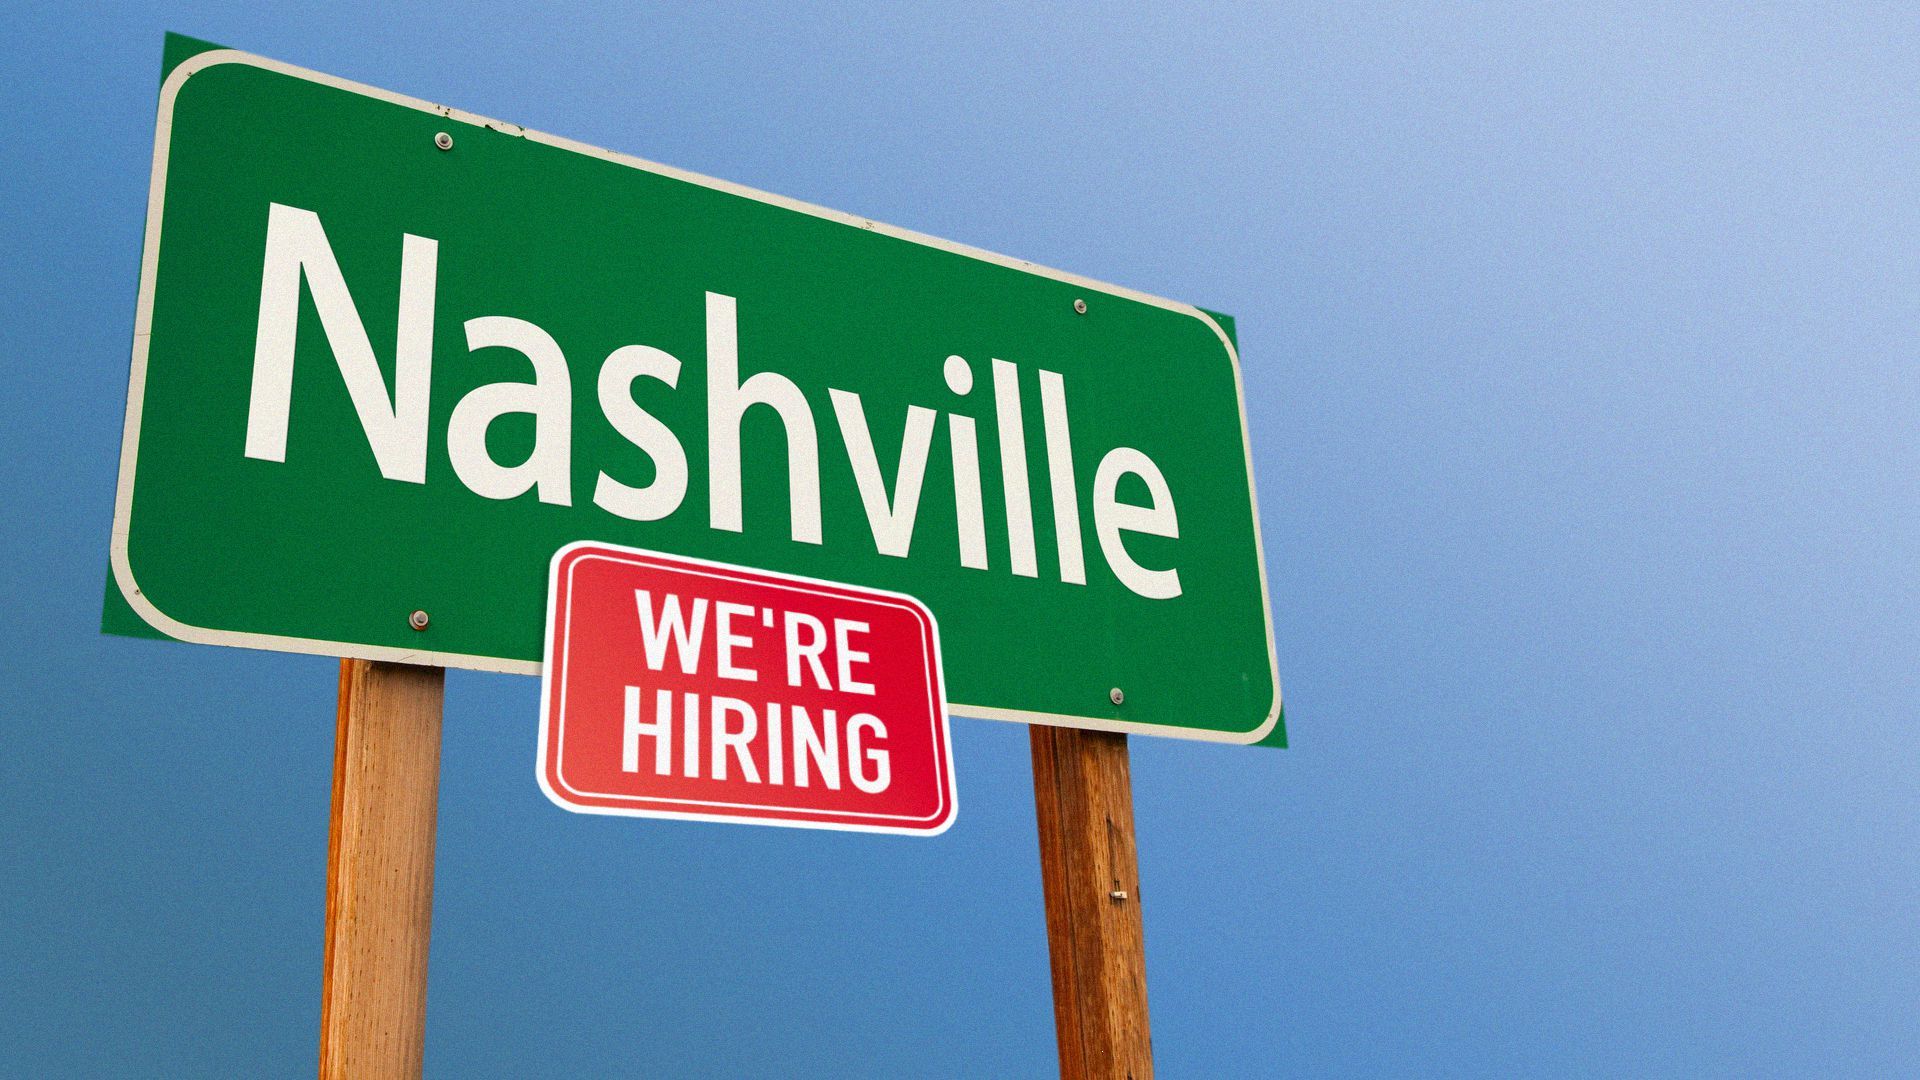 Nashville road sign with a "we're hiring" sign.